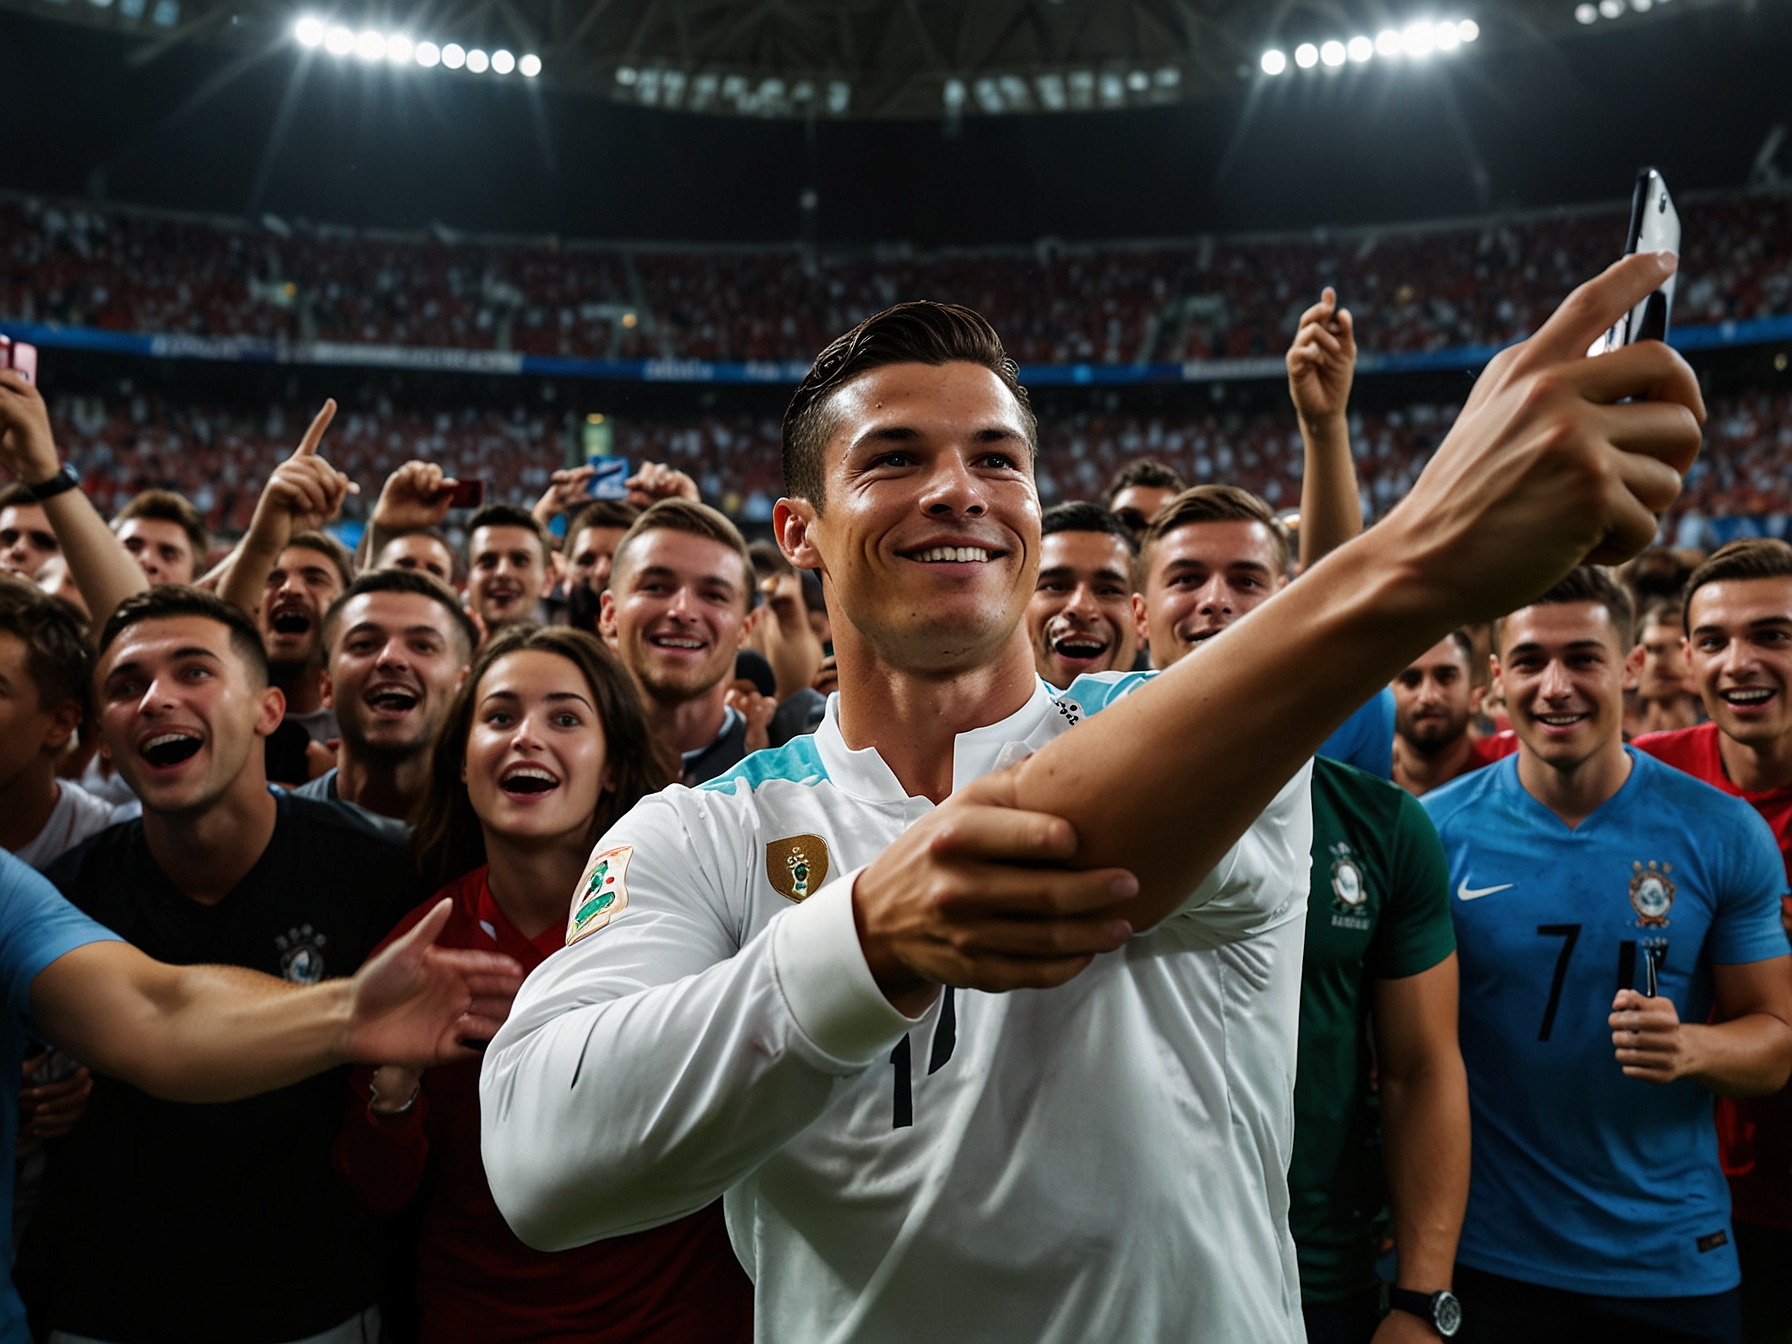 Fans rush onto the pitch to take selfies with Cristiano Ronaldo after Portugal's match, highlighting significant security breaches at the Euros 2024 tournament.